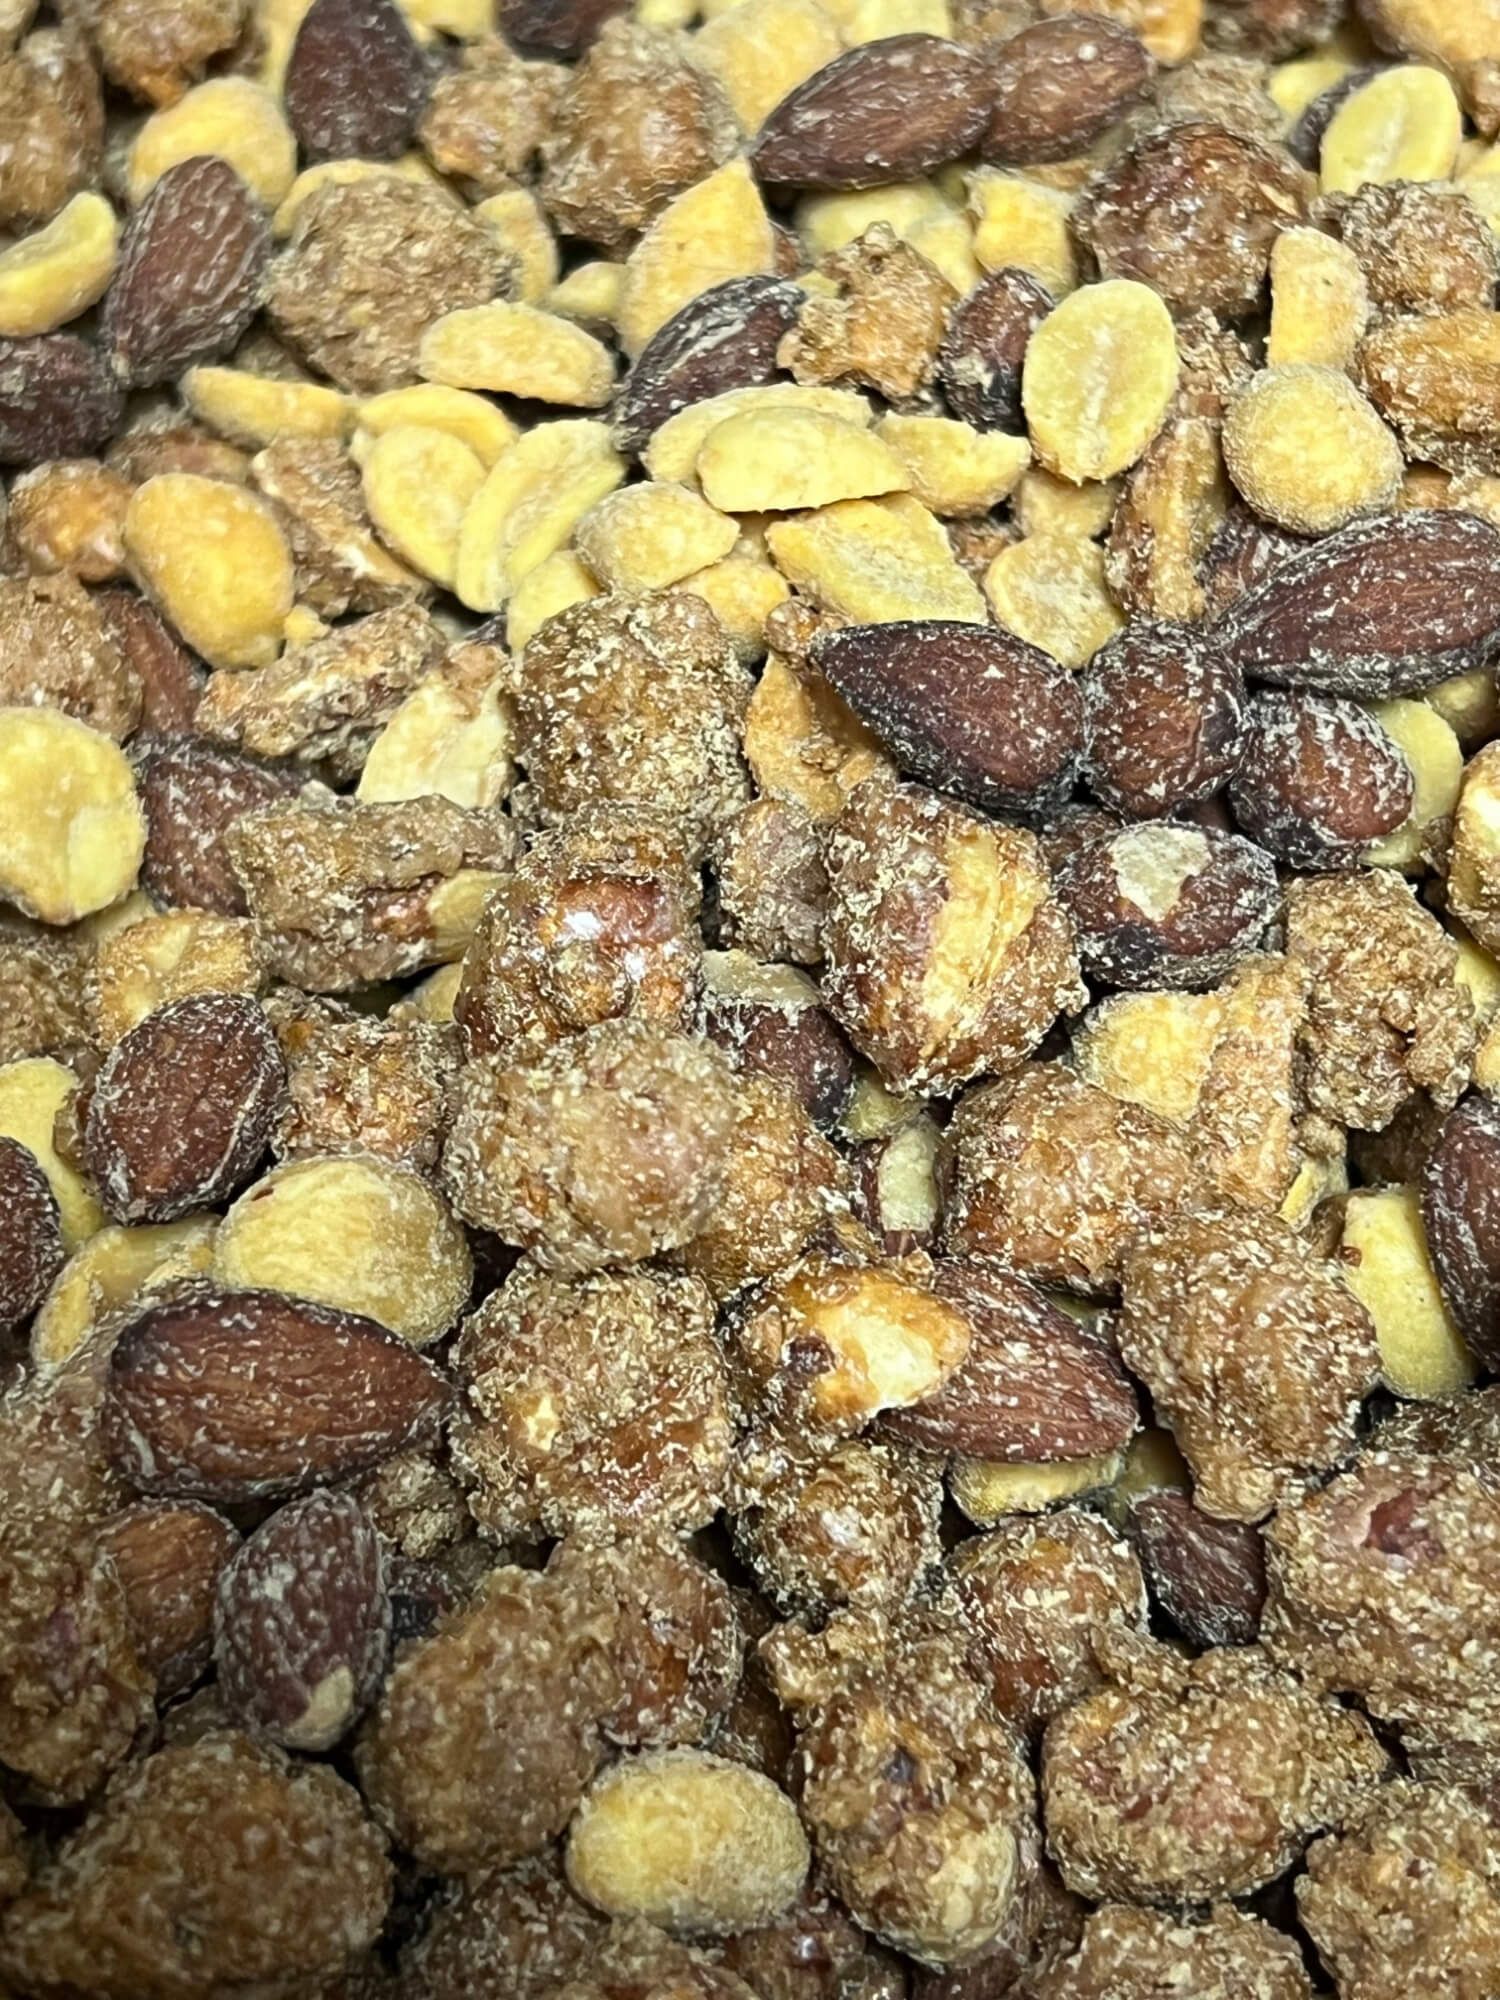 A close up of a pile of nuts on a table.